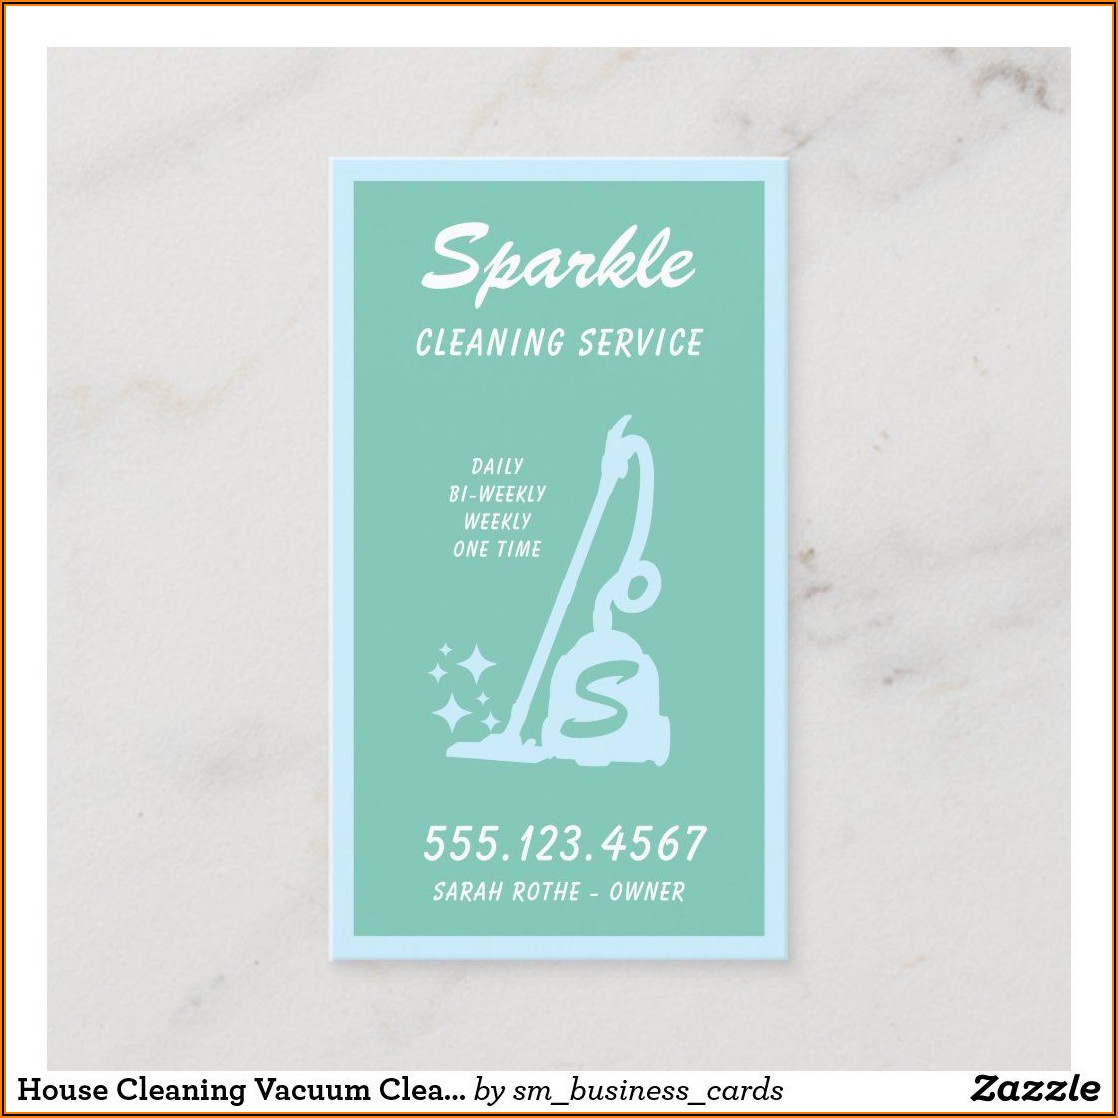 Cleaning Service Business Cards Ideas